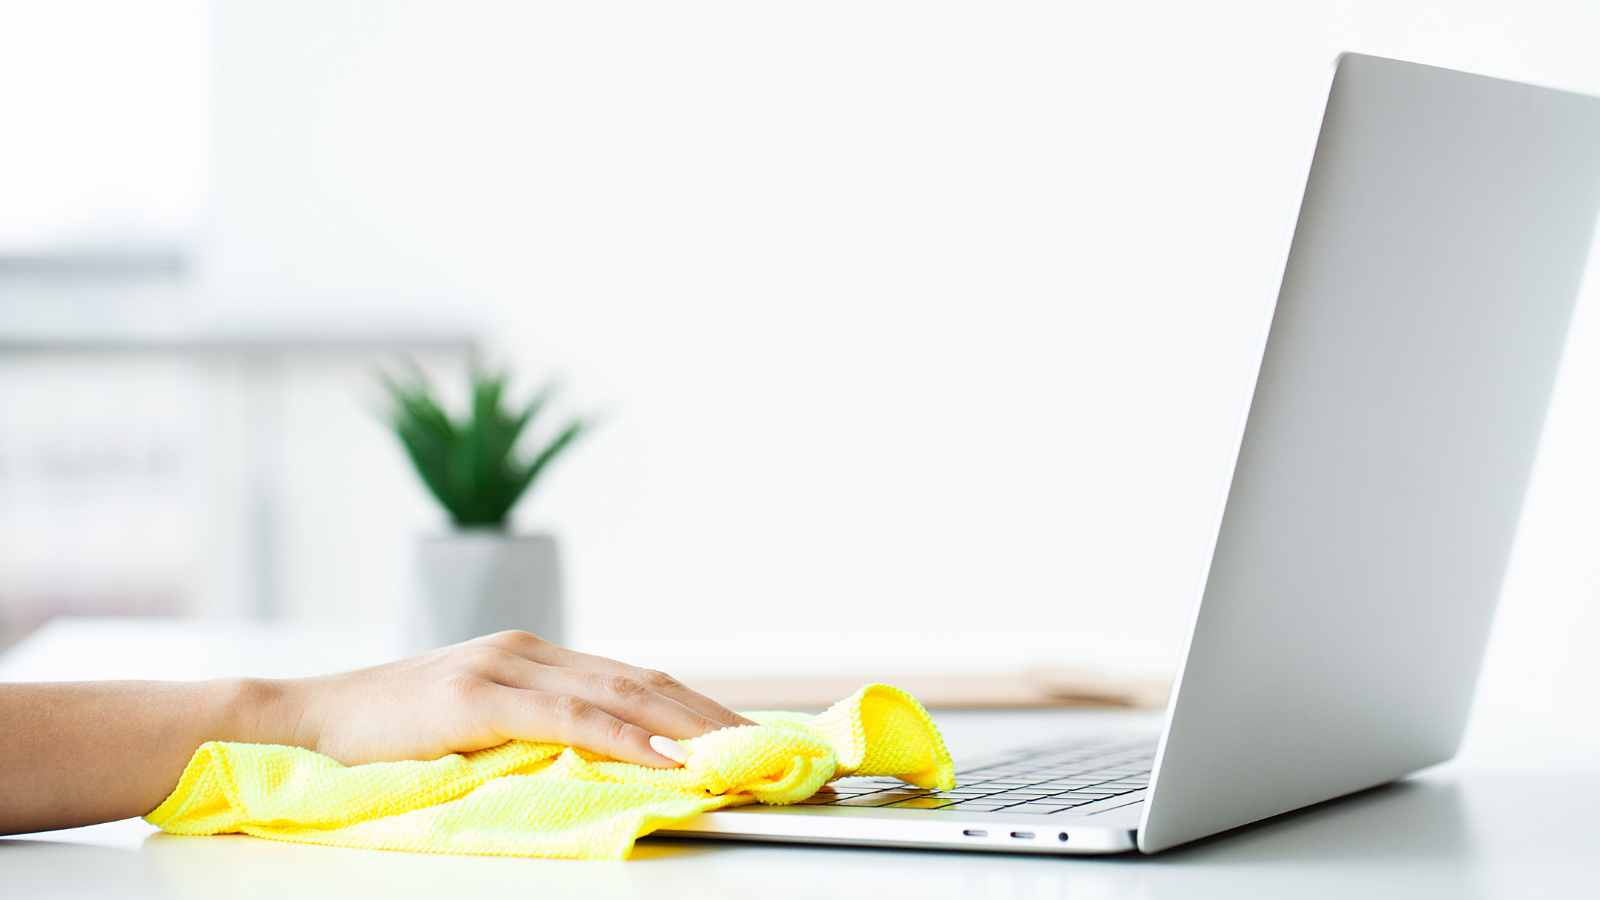 Hand wiping down laptop and desk with a yellow cloth